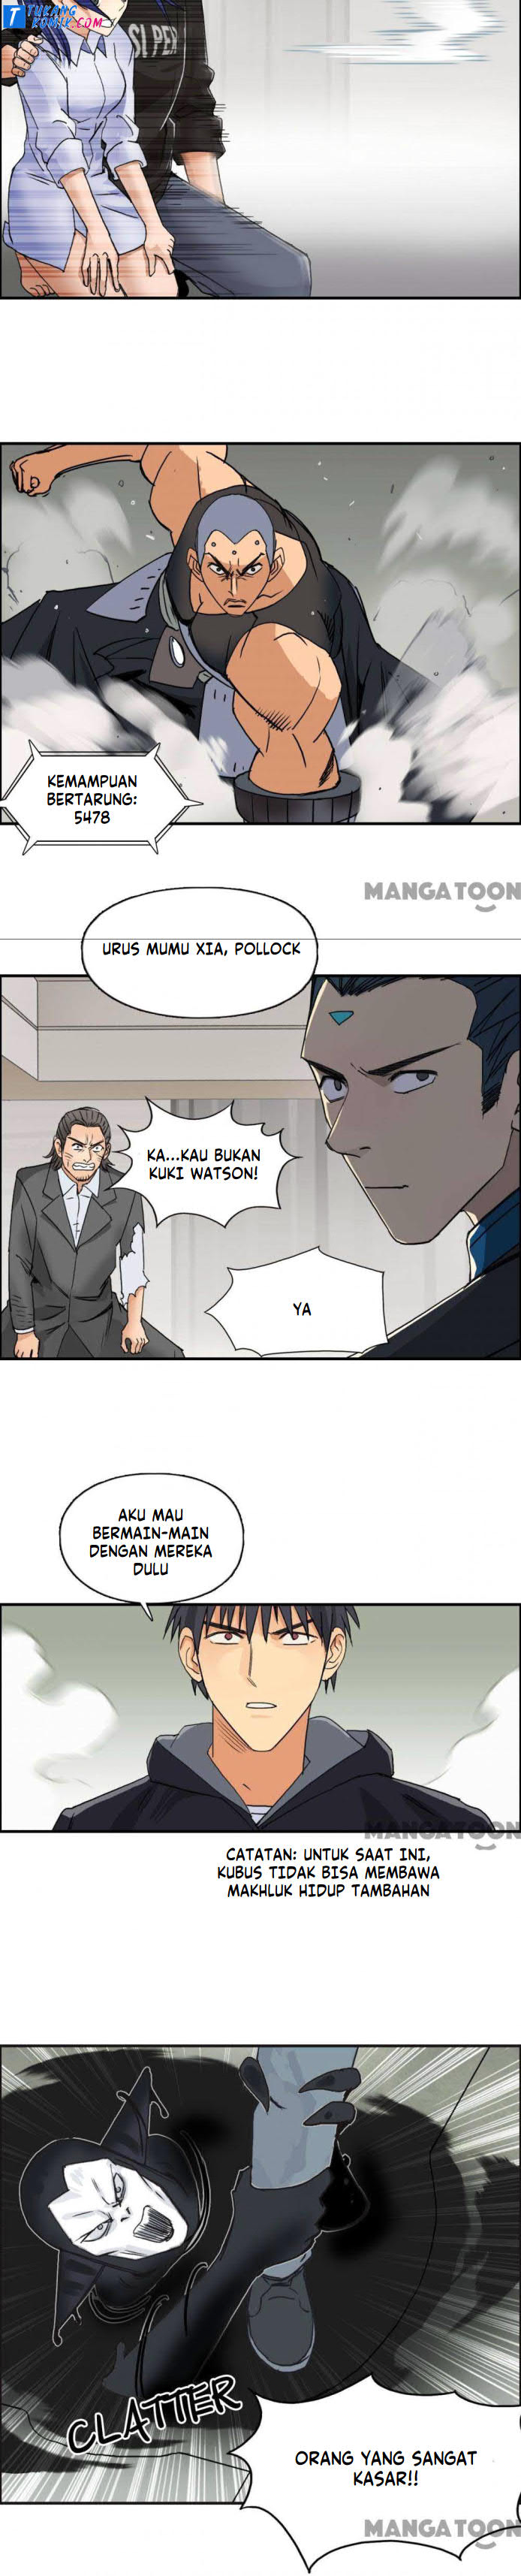 Super Cube Chapter 88